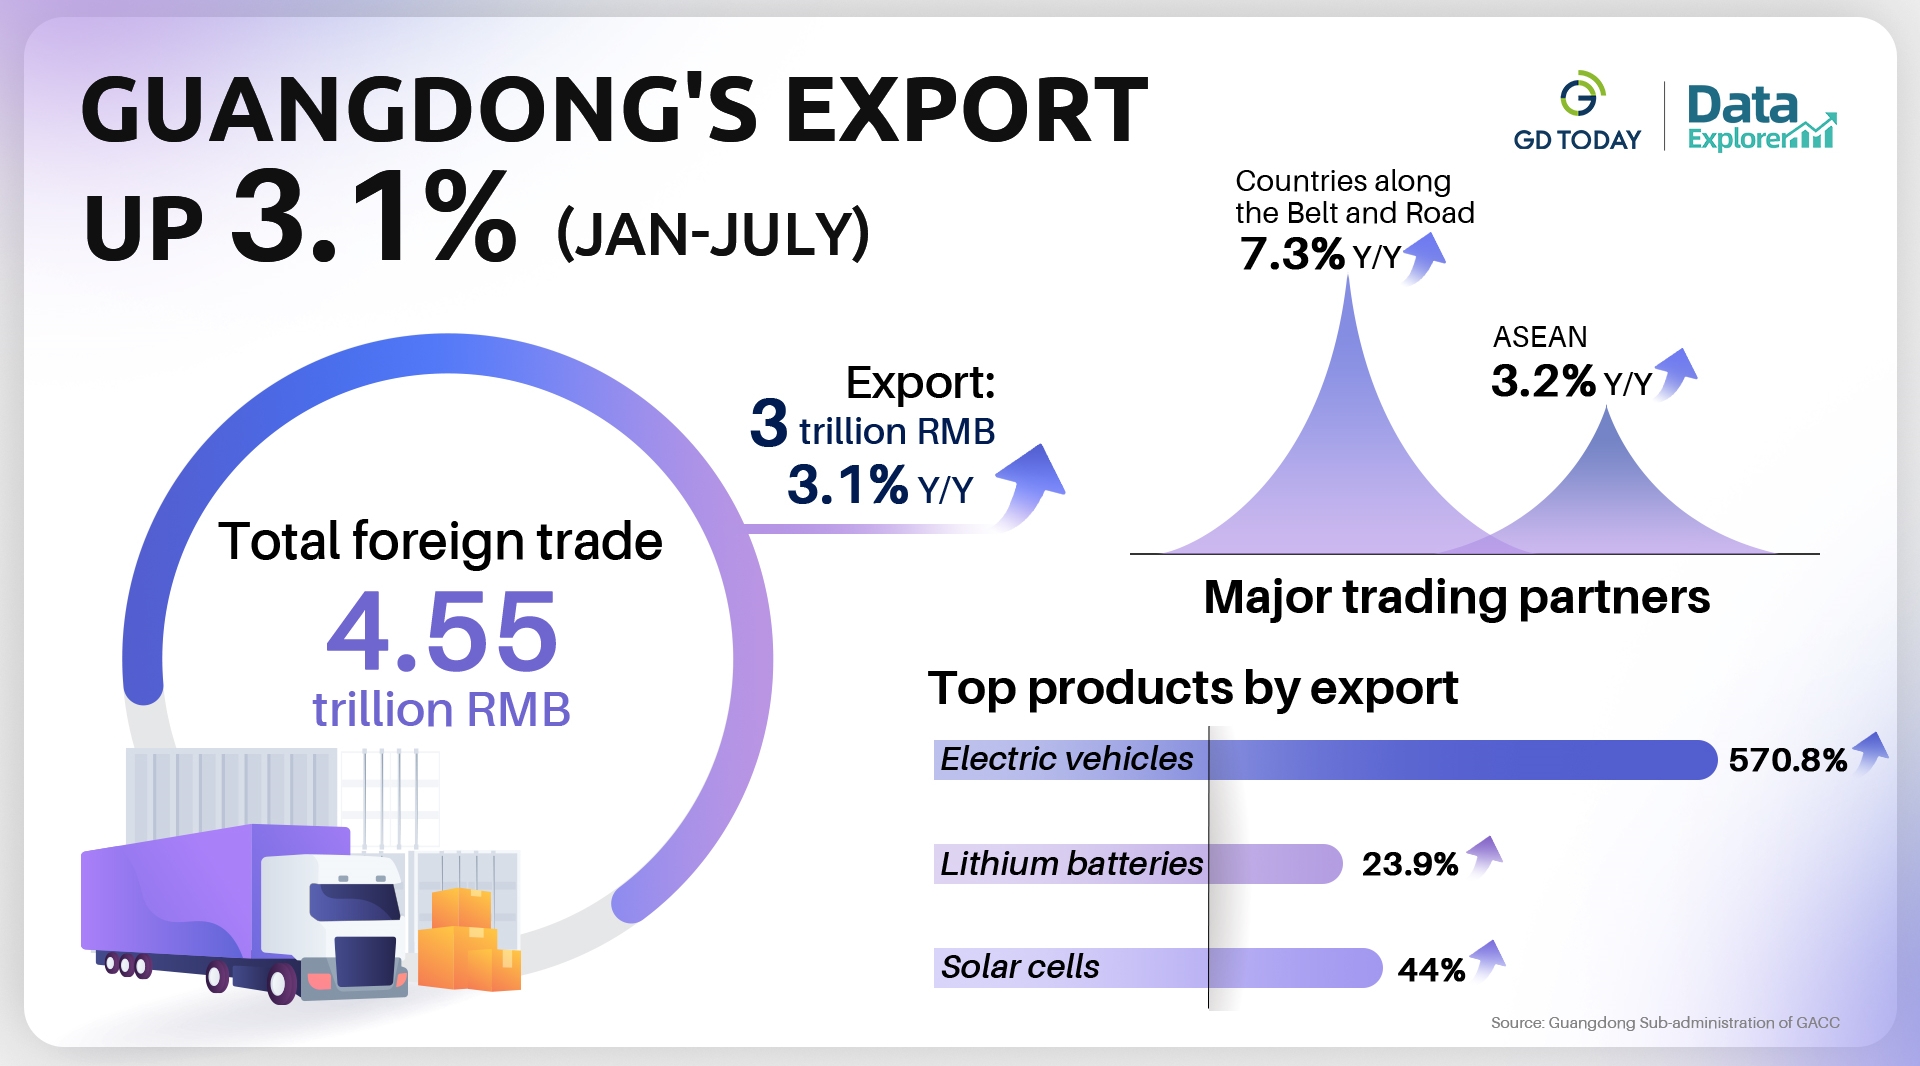 Data Explorer | Guangdong expands foreign trade with B&amp;R countries in Jan-July